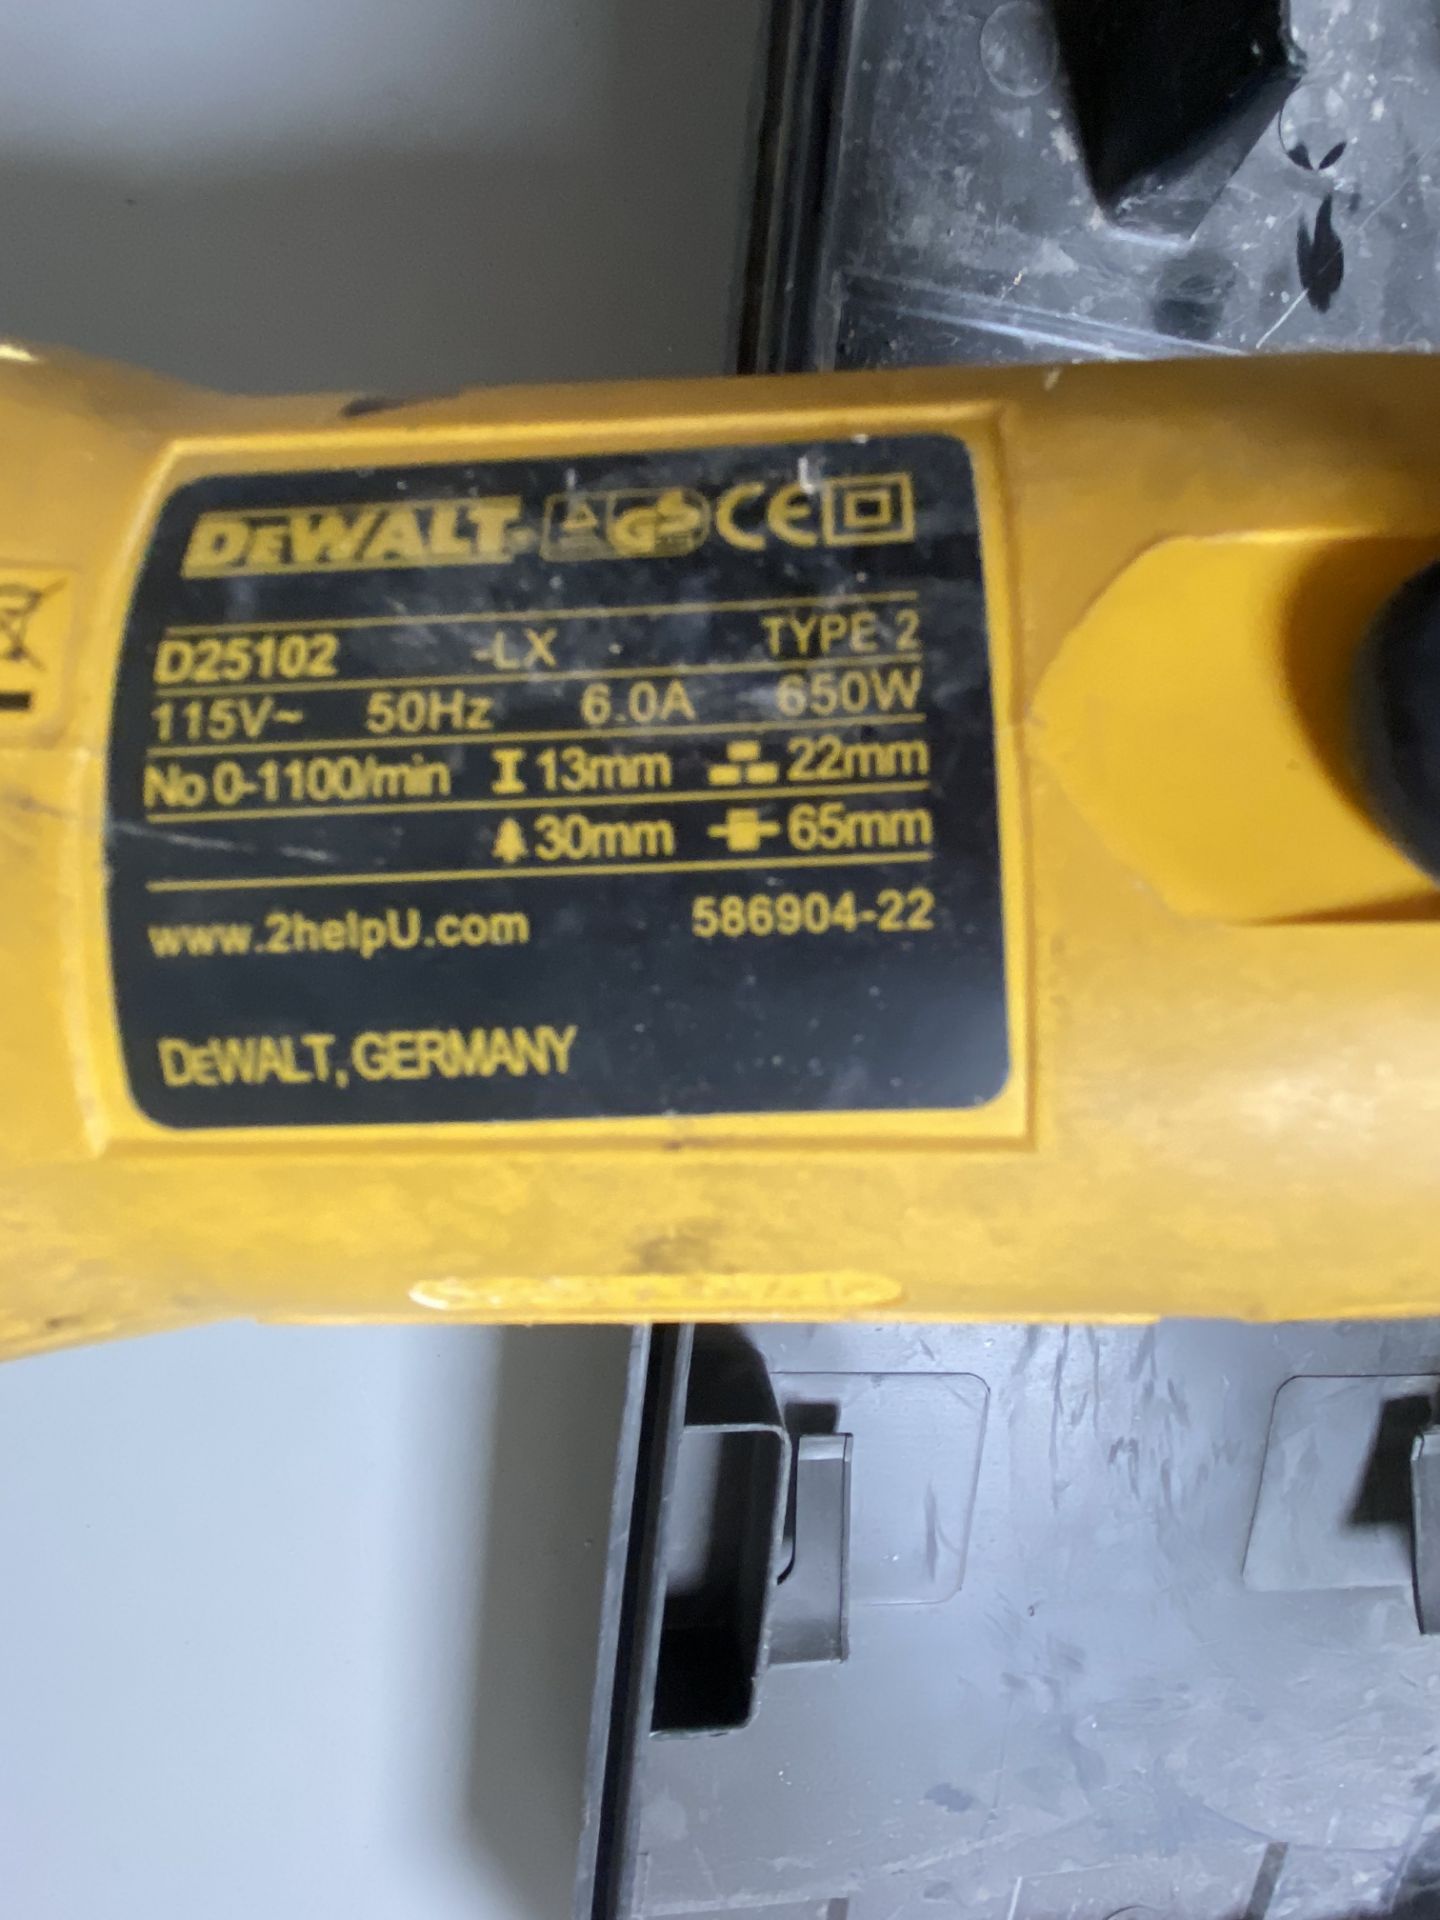 Dewalt D25102 115v Rotary Hammer Drill with Carry Case, Serial No. 586904-22 - Image 3 of 5